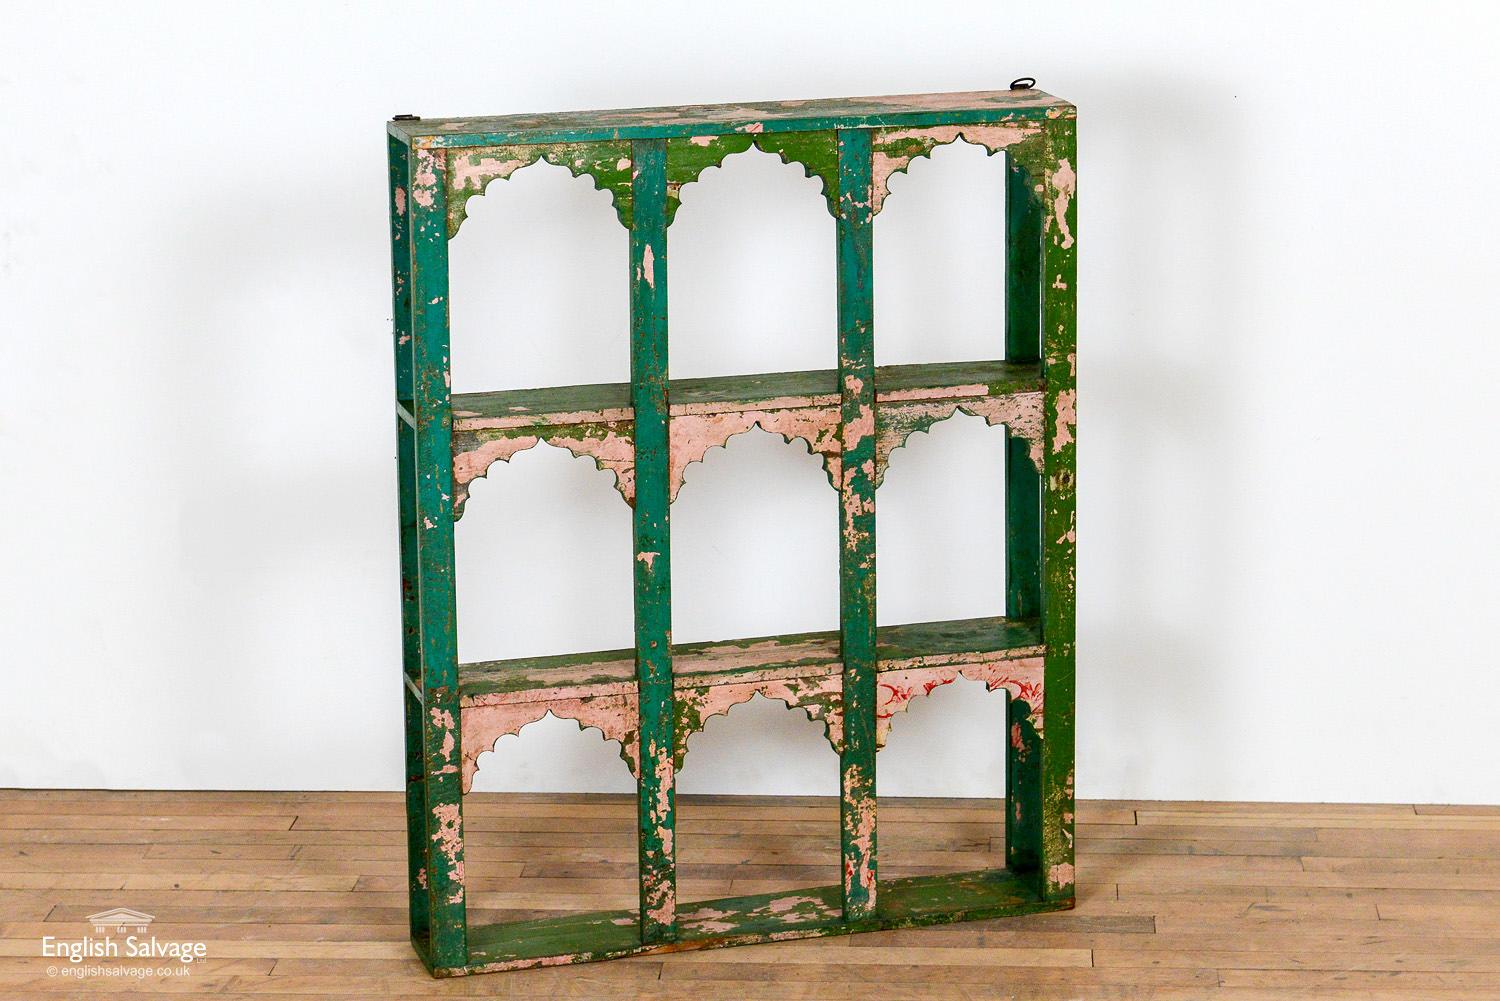 Striking reclaimed wooden shelving or display unit. A beautiful patina has formed from the green paint flaking away to reveal remnants of pink and red paint beneath. Mihrab style inserts arches top each of the nine compartments. Hanging hooks are